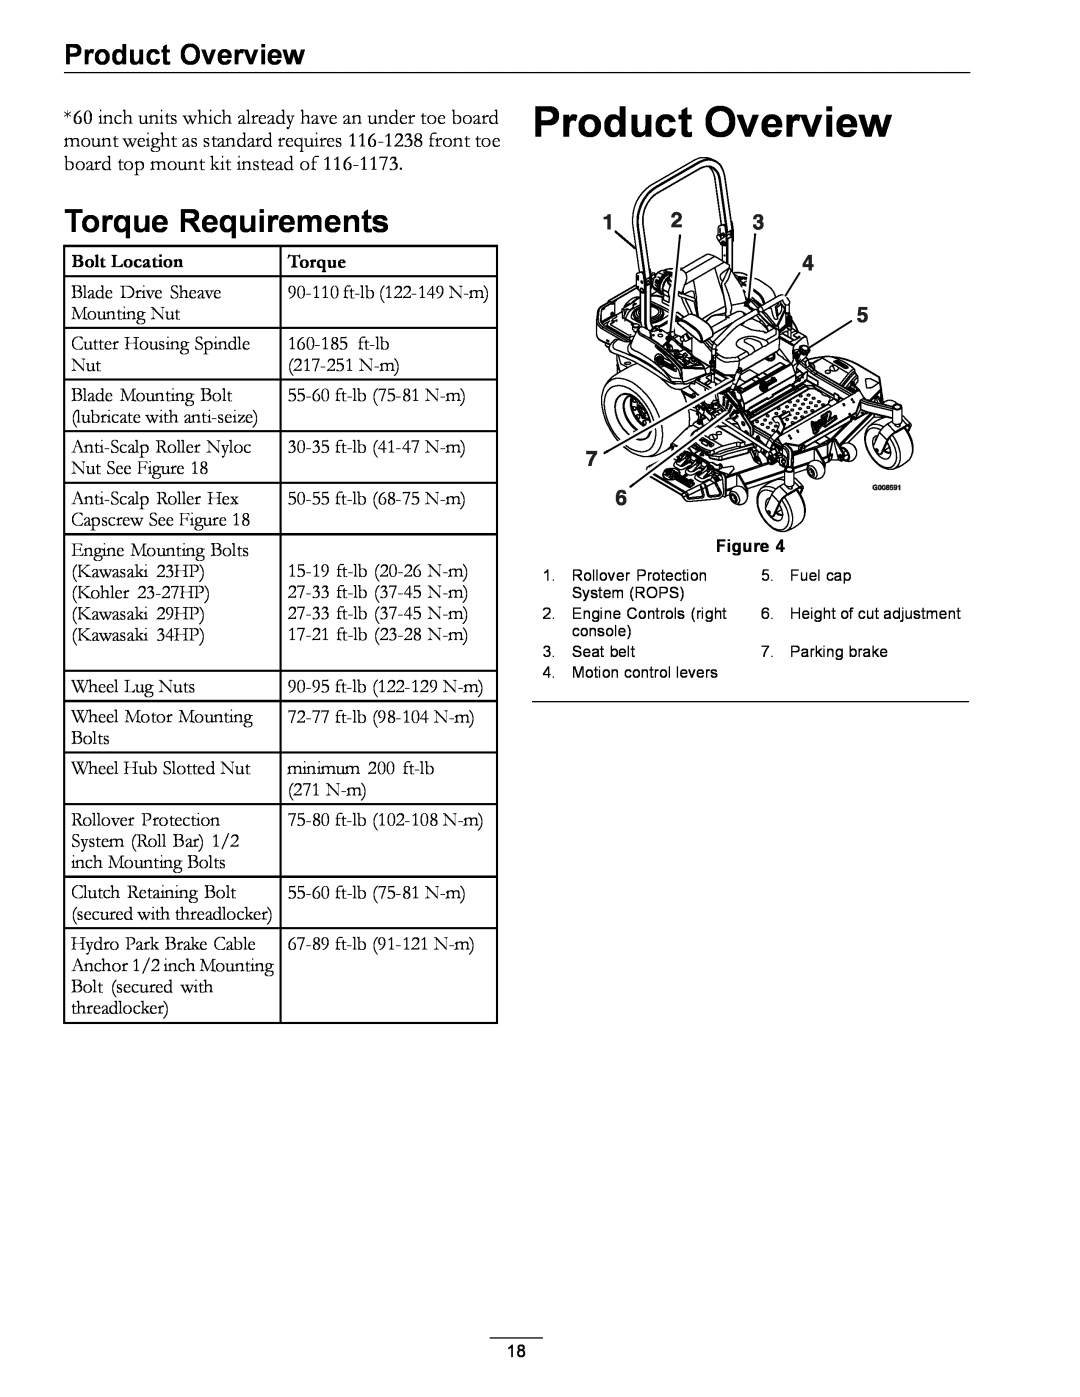 Exmark 000 & higher, 4500-471, S/N 790 manual Product Overview, Torque Requirements 